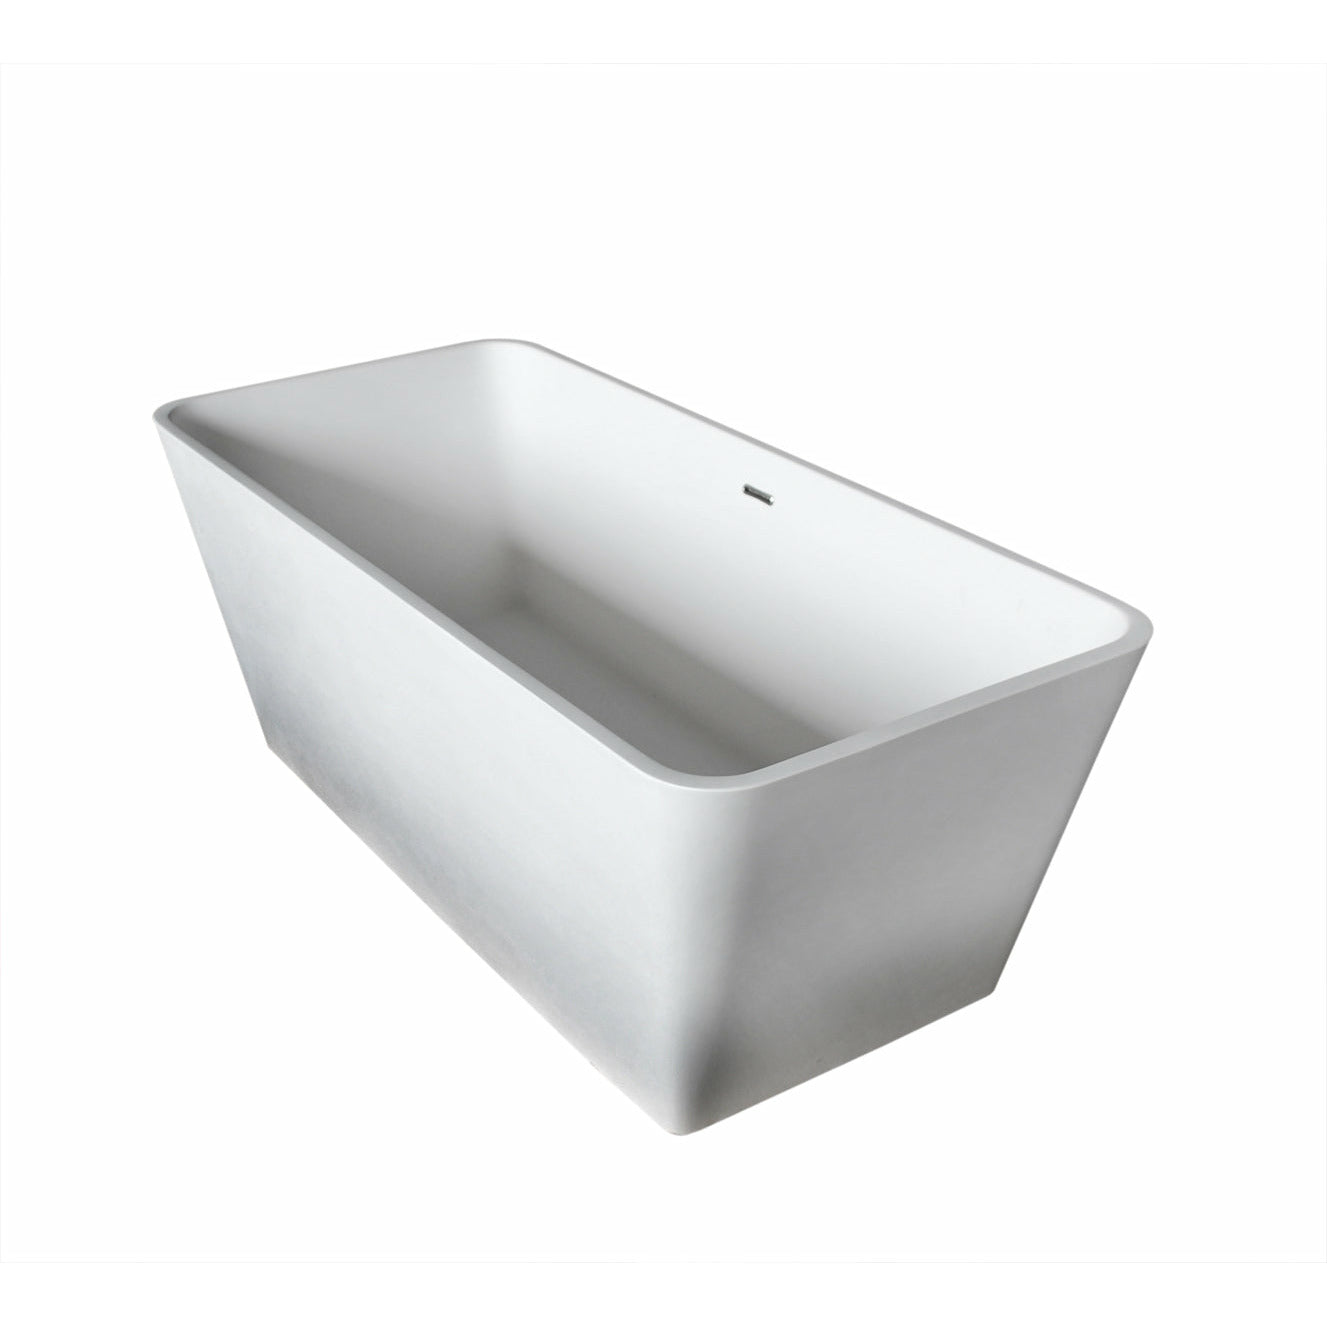 Anzzi Cenere 58.25 in. Solid Surface Soaking Bathtub in White with Angel Faucet in Brushed Nickel - Floor Mounted - FTAZ501-0044B - Vital Hydrotherapy